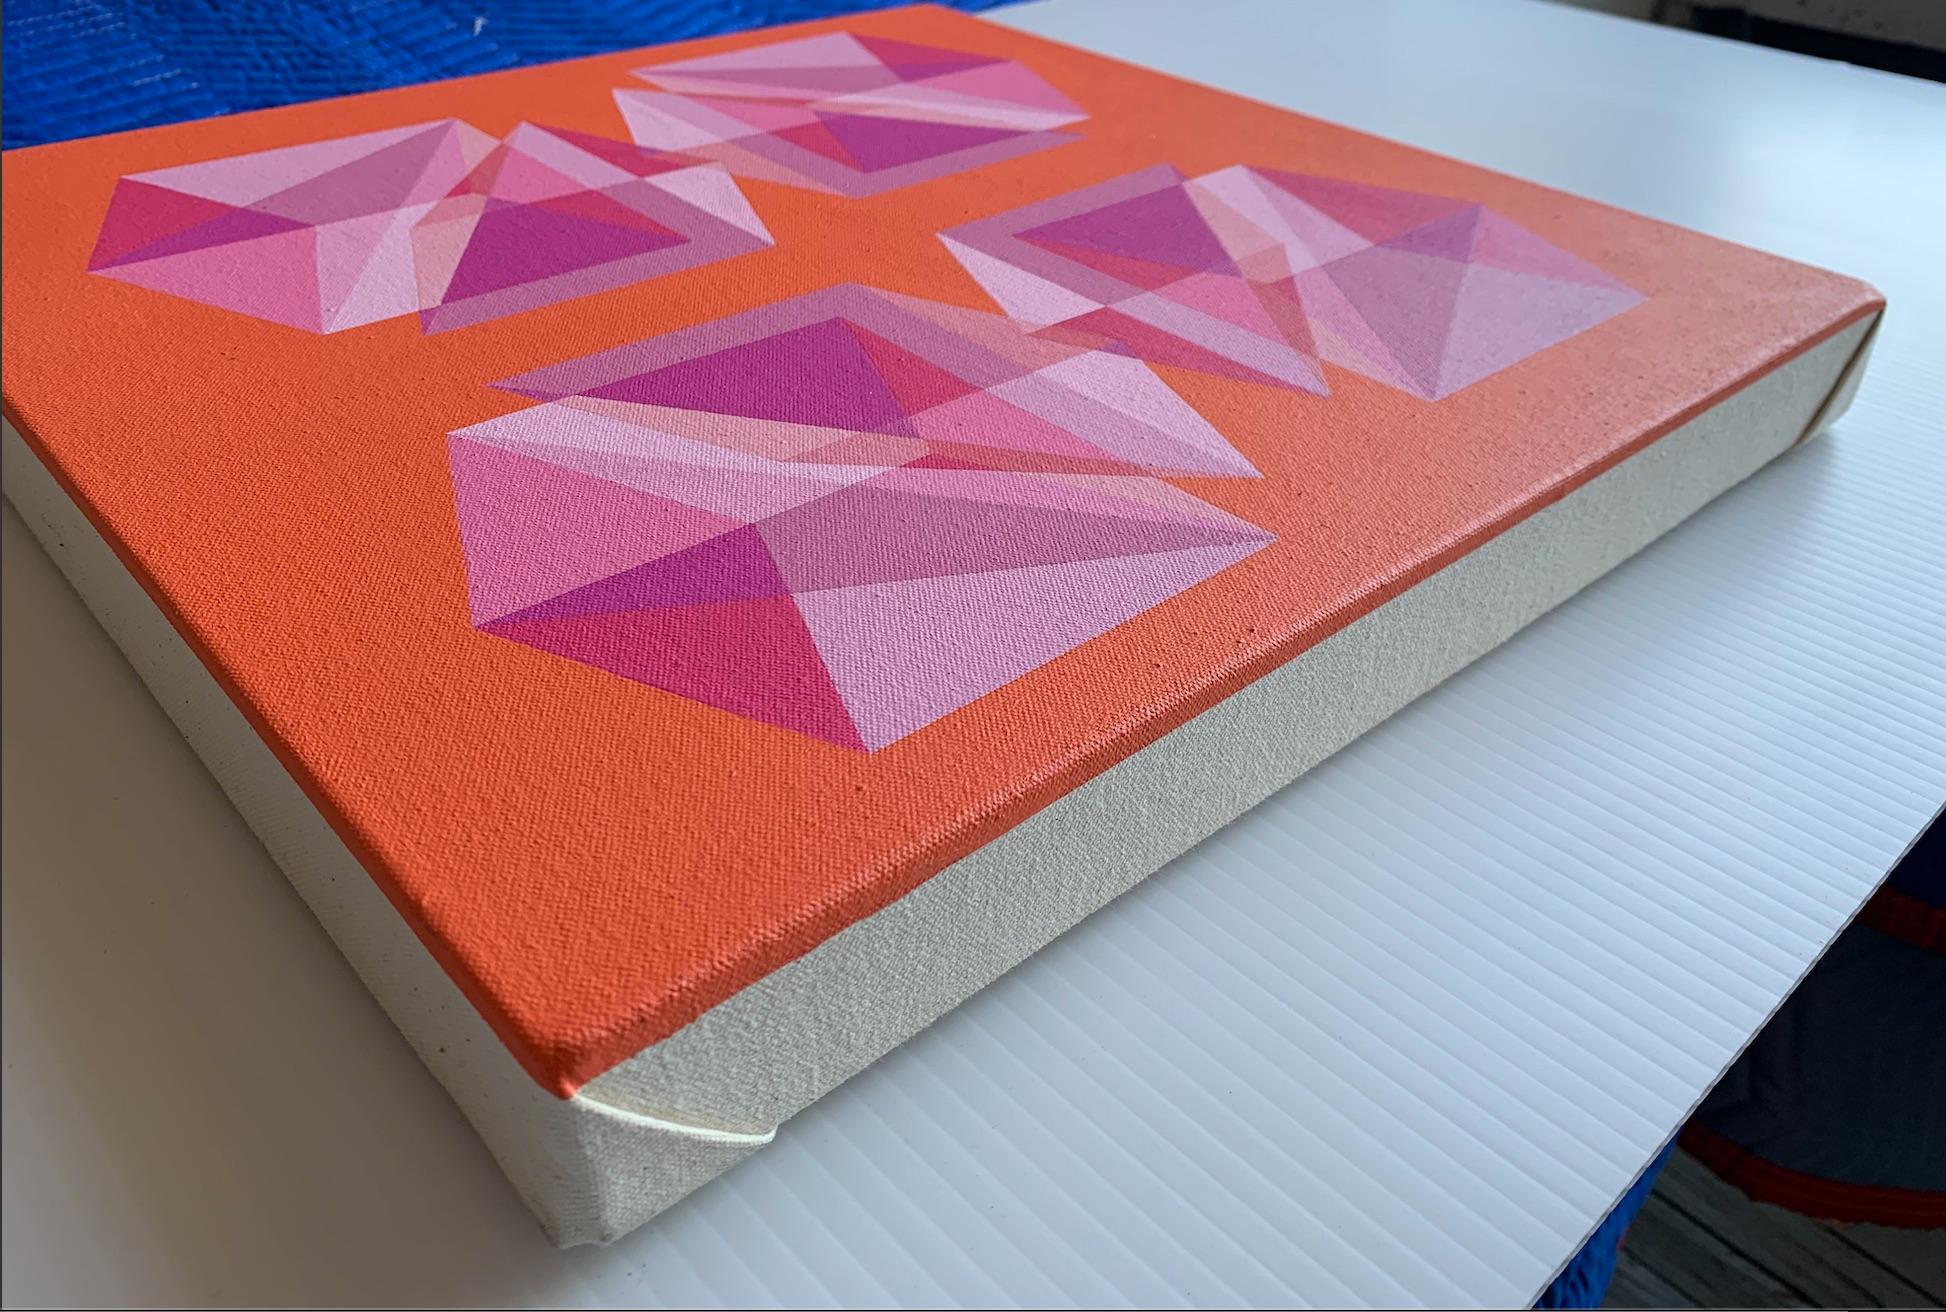 Cubes Divided Equally into Three #15: abstract geometric painting w/ pinks - Abstract Painting by Benjamin Weaver